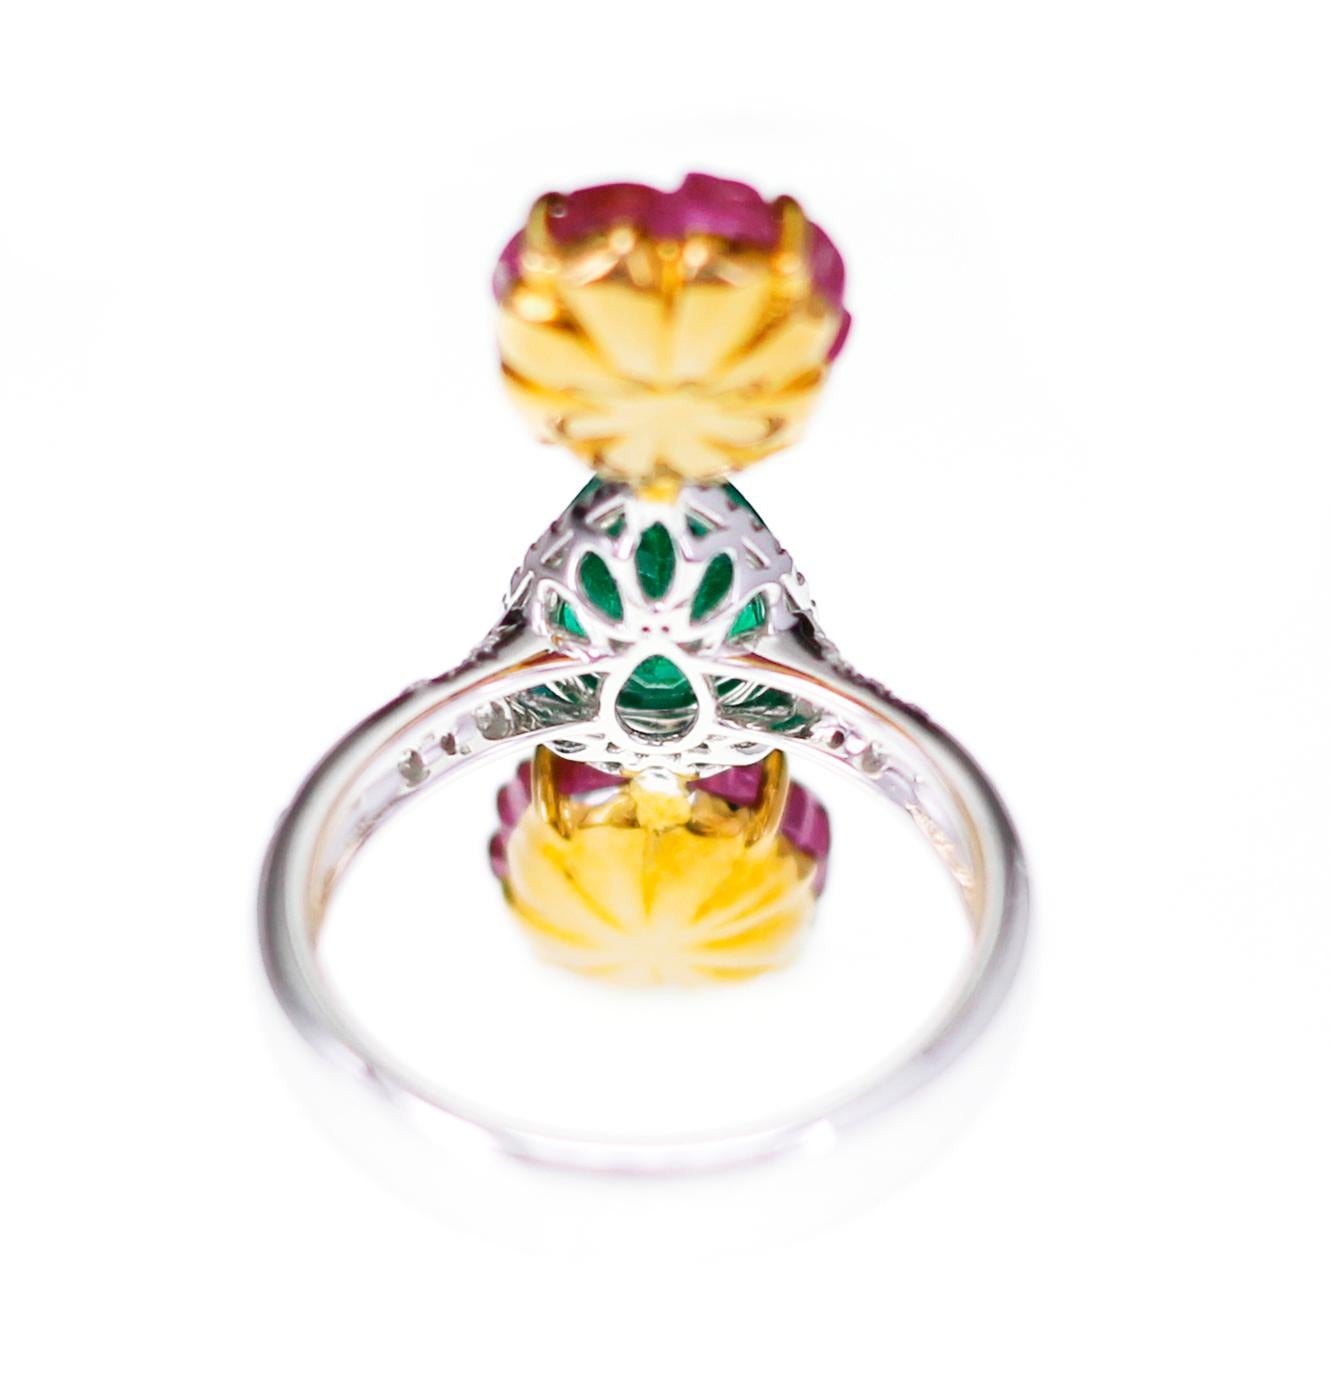 Anglo-Indian 6 Carat Antique Ruby Carving with 1.55 Carat Vivid Green Emerald For Sale